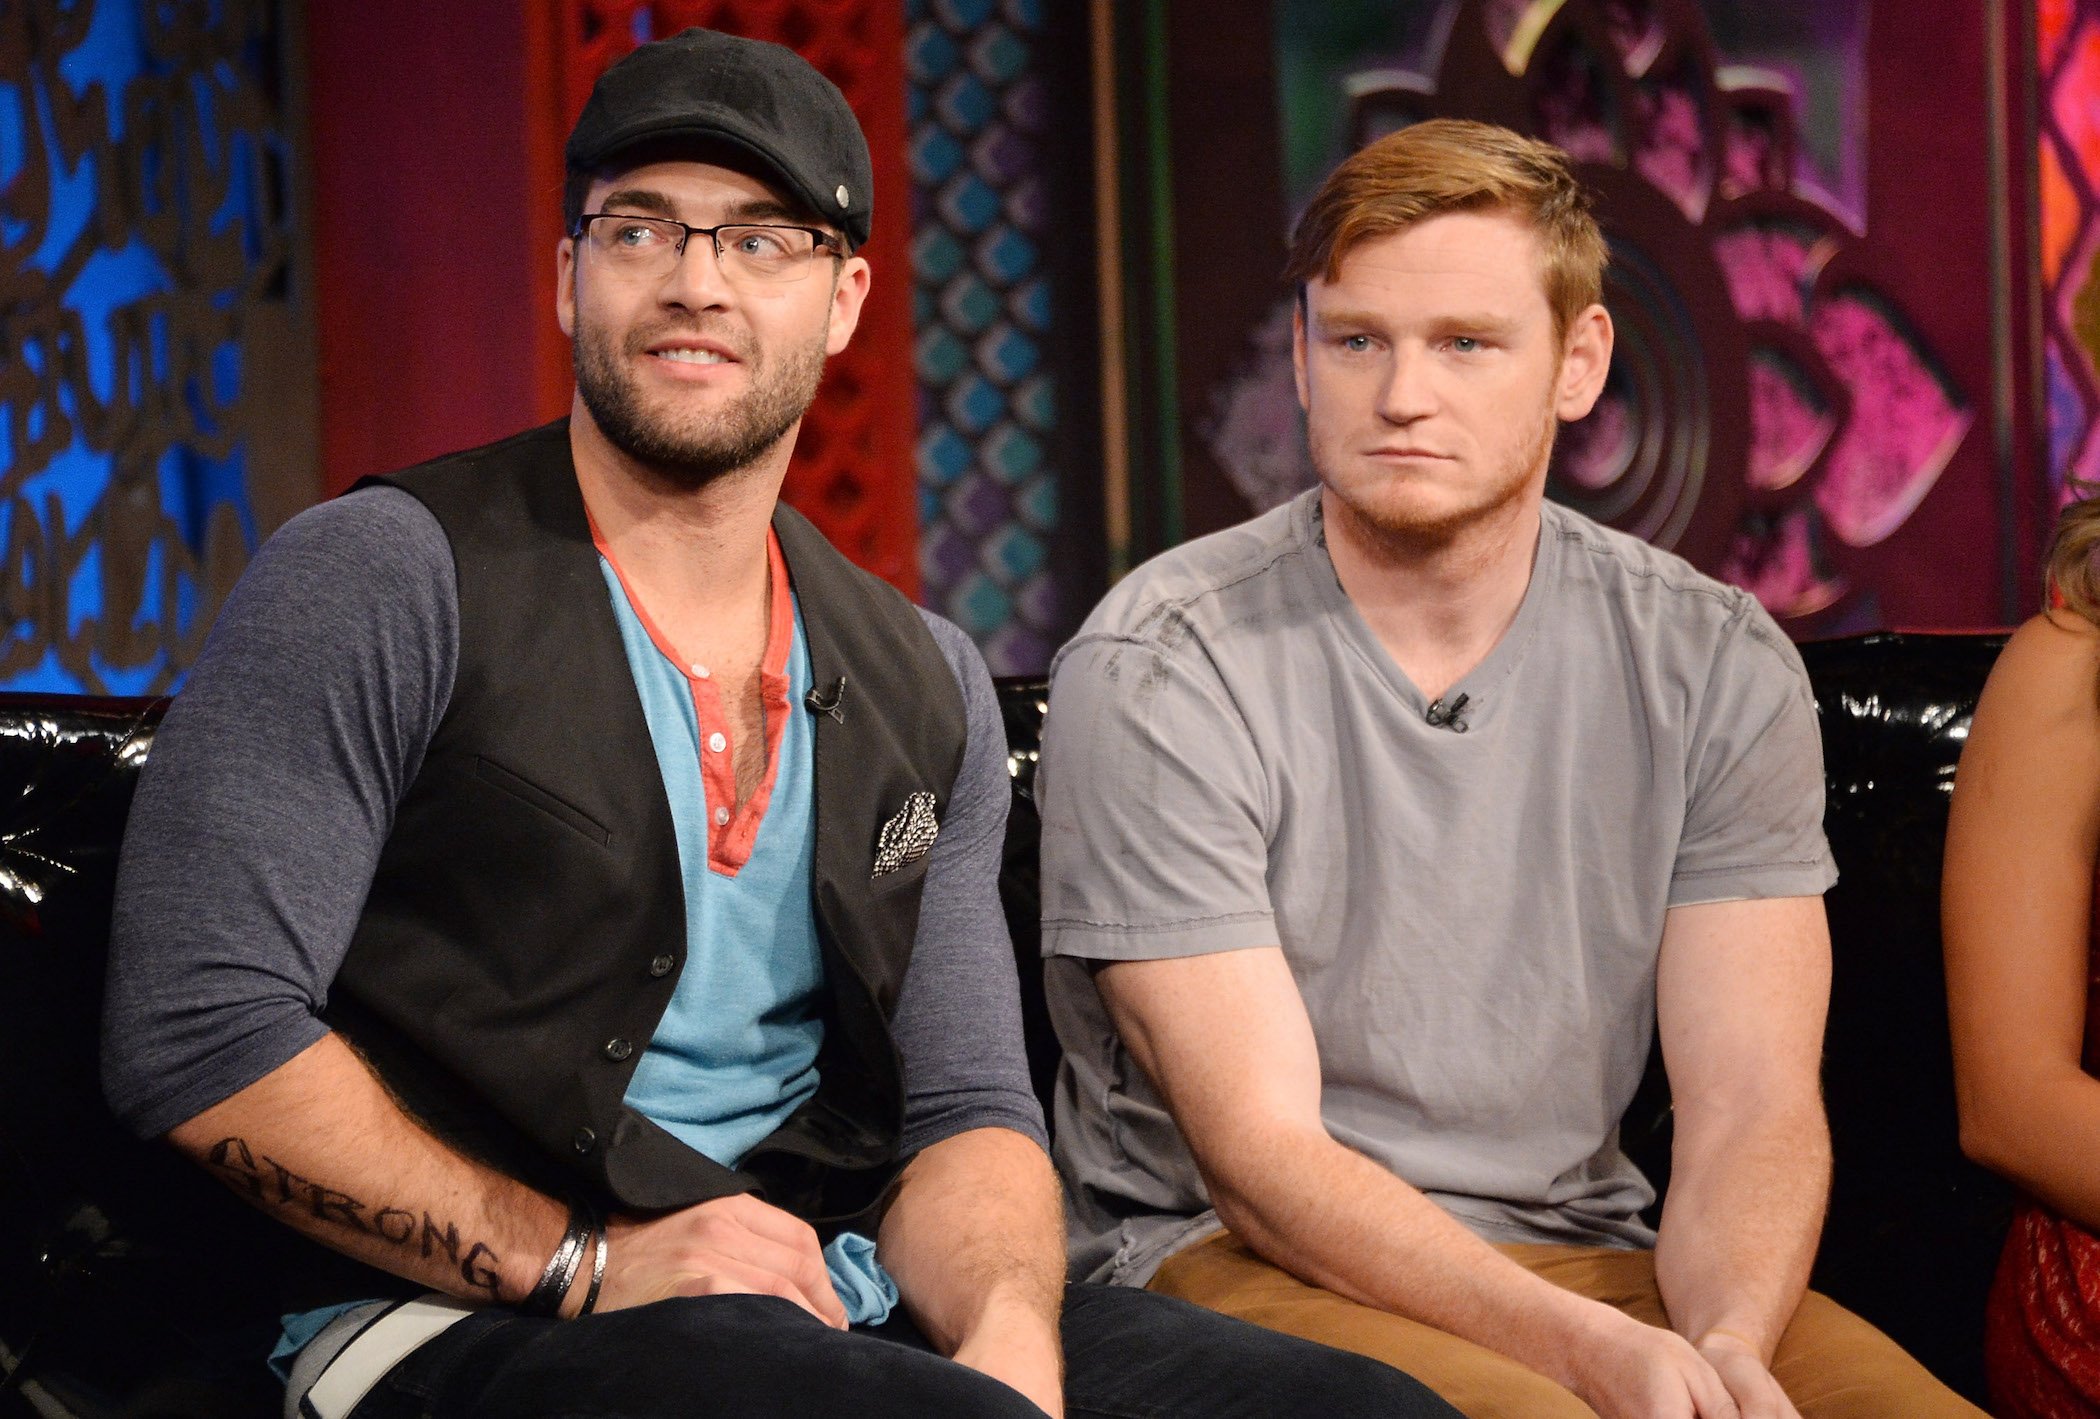 CT Tamburello and Wes Bergmann at MTV's 'The Challenge: Rivals II' final episode and reunion party. CT and Wes could be cast in 'The Challenge' Season 38